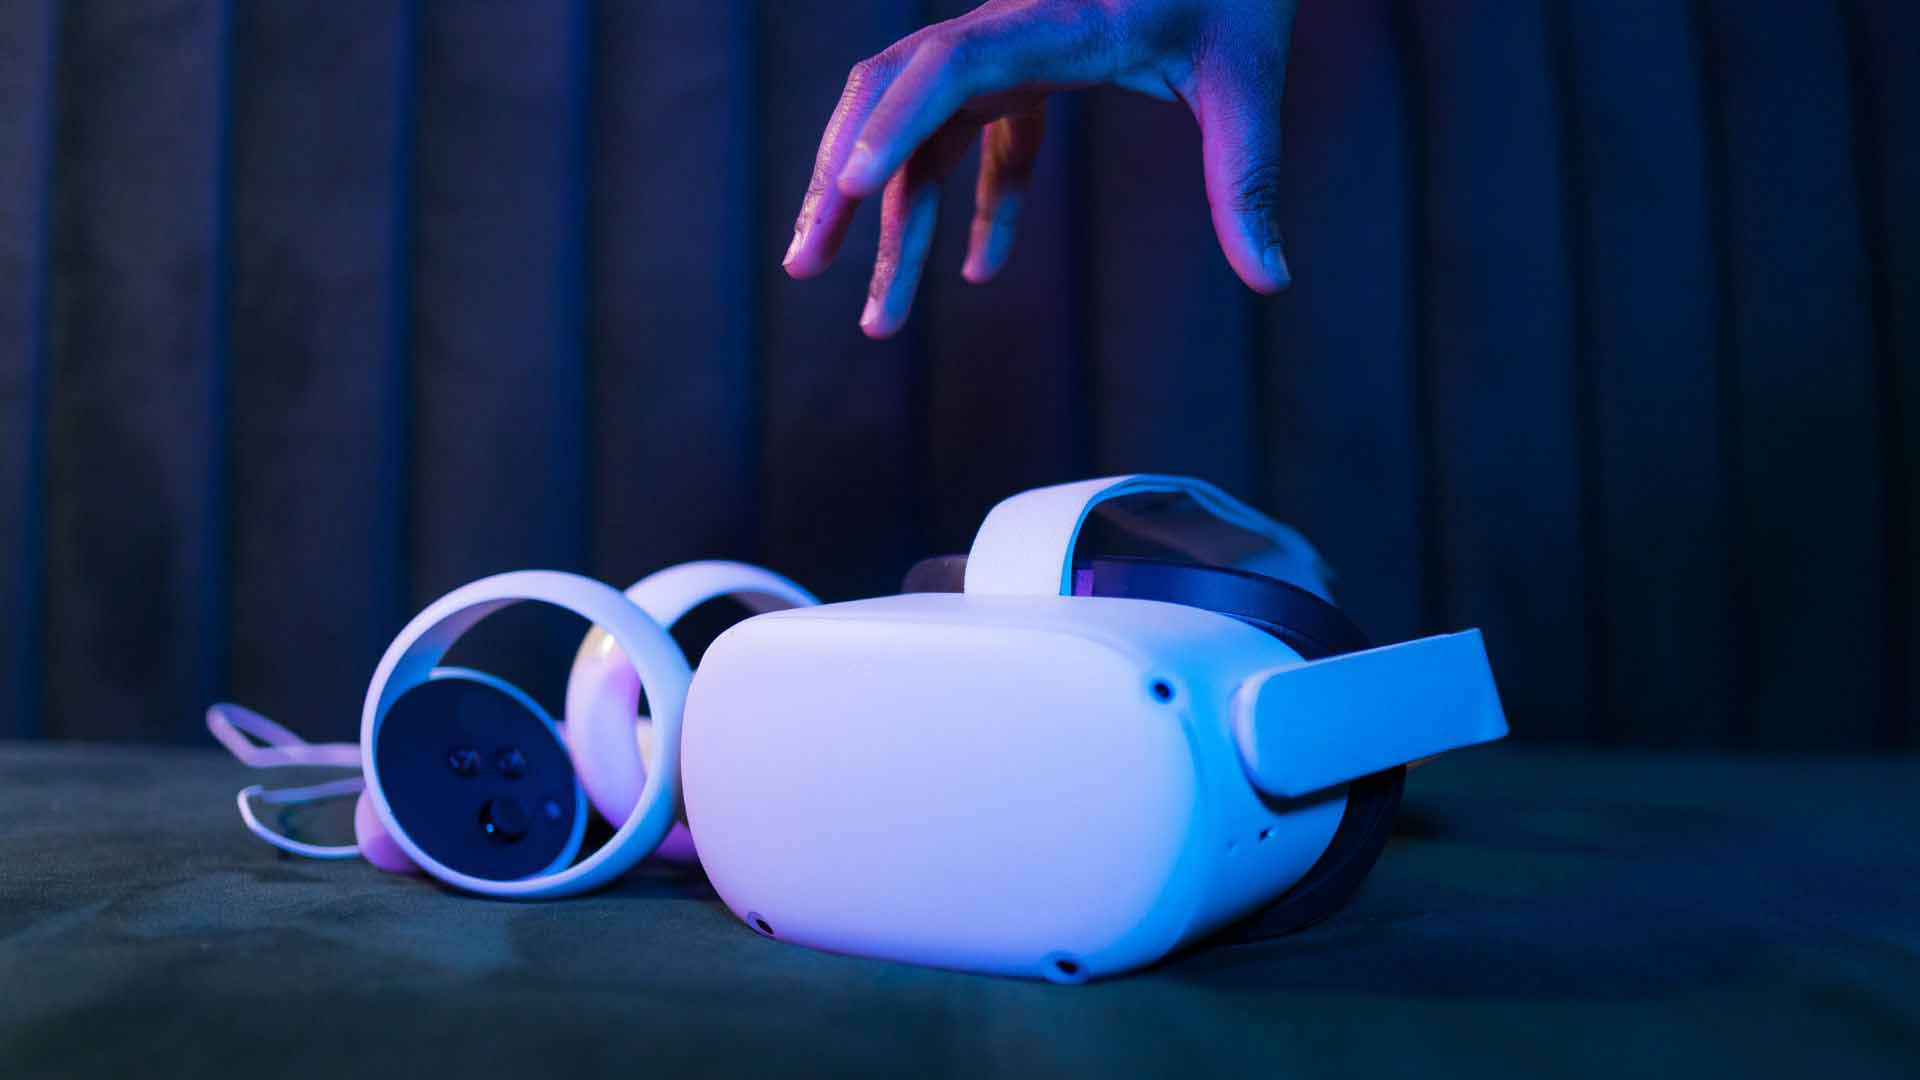 vr headset being reached for